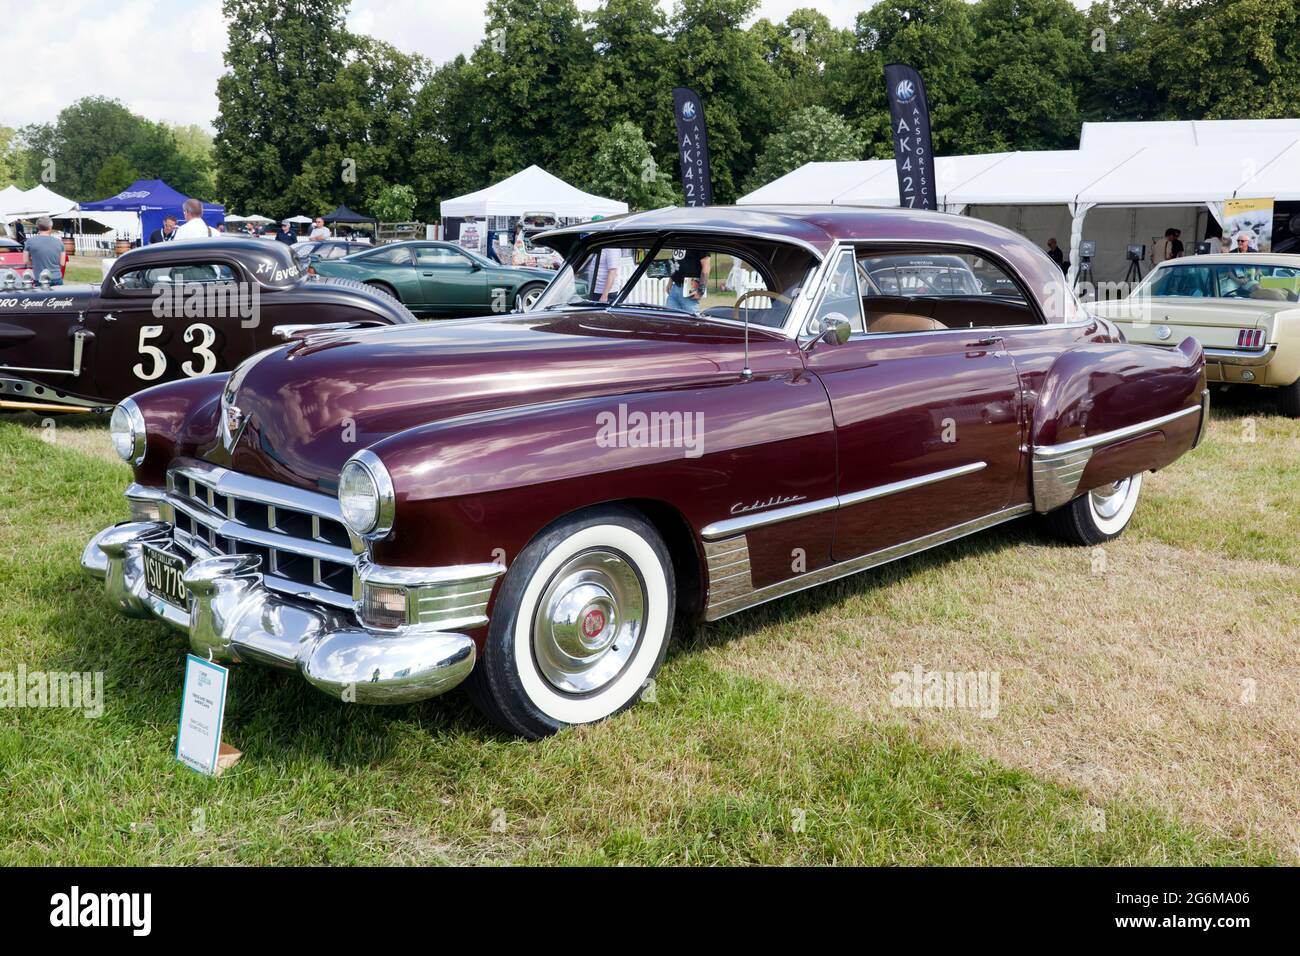 Three-quarters front view of a Maroon, 1949, Cadillac Coupe De Ville, on display at the 2021 London Classic Car Show Stock Photo